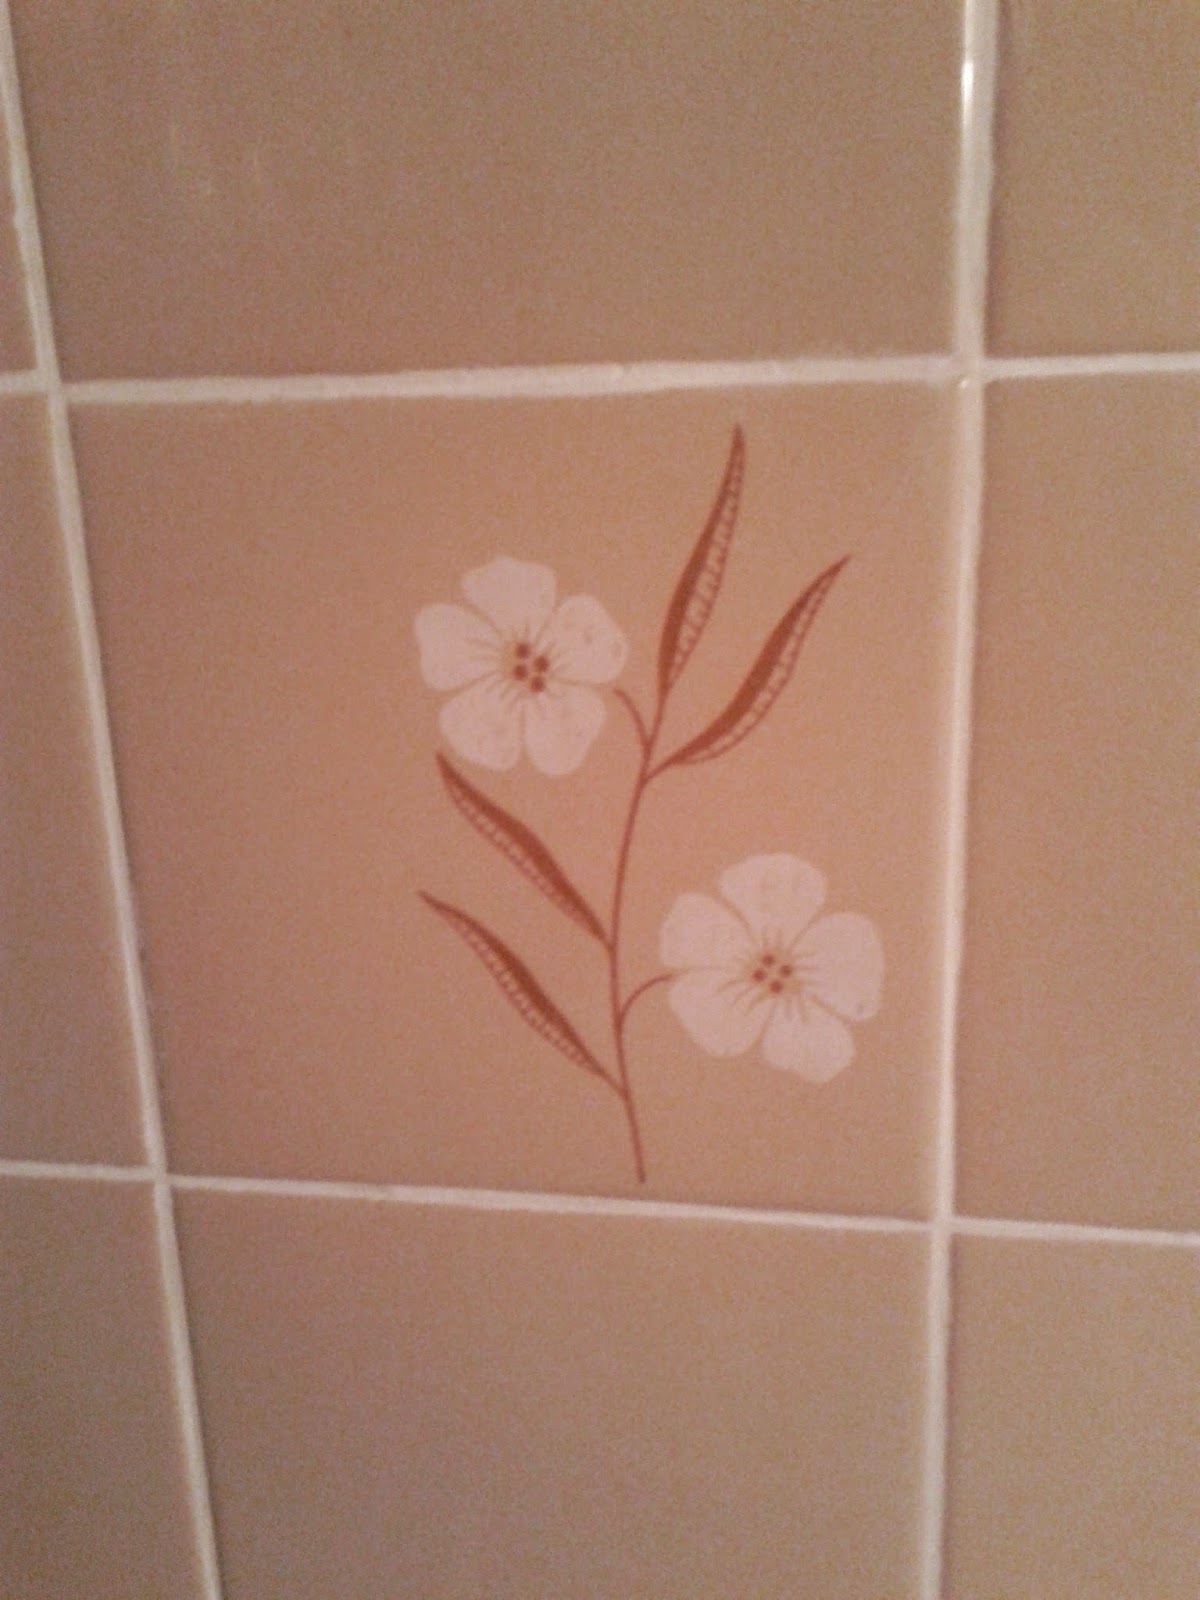 Toronto things: Stock Photo: Light brown bathroom tiles with flower